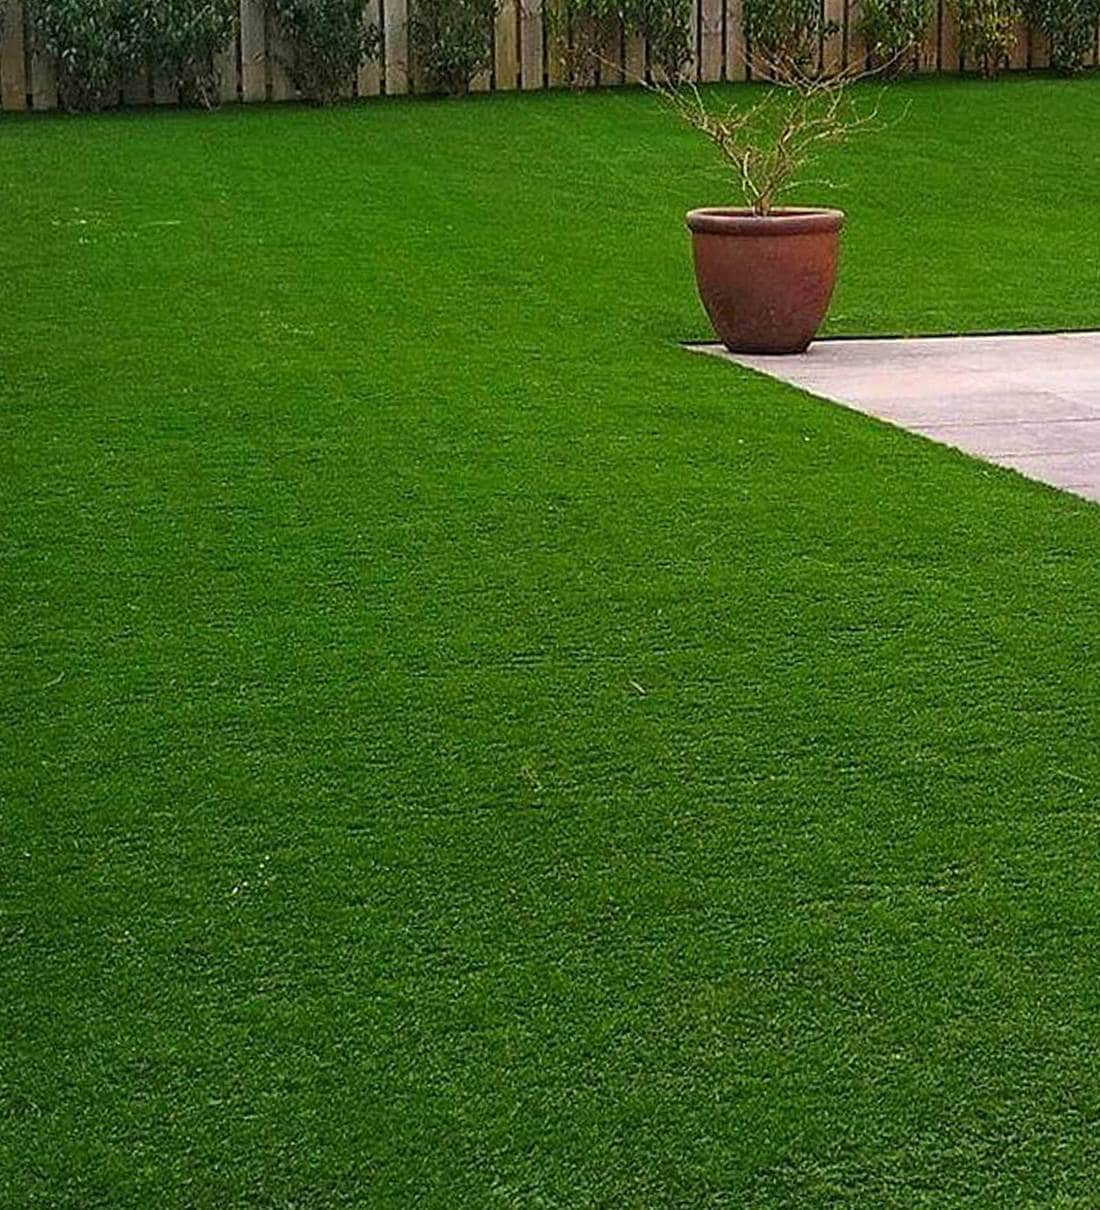 Desire The Best Artificial Grass Vendor That Gives Peace Of Mind? Get The Info Here post thumbnail image